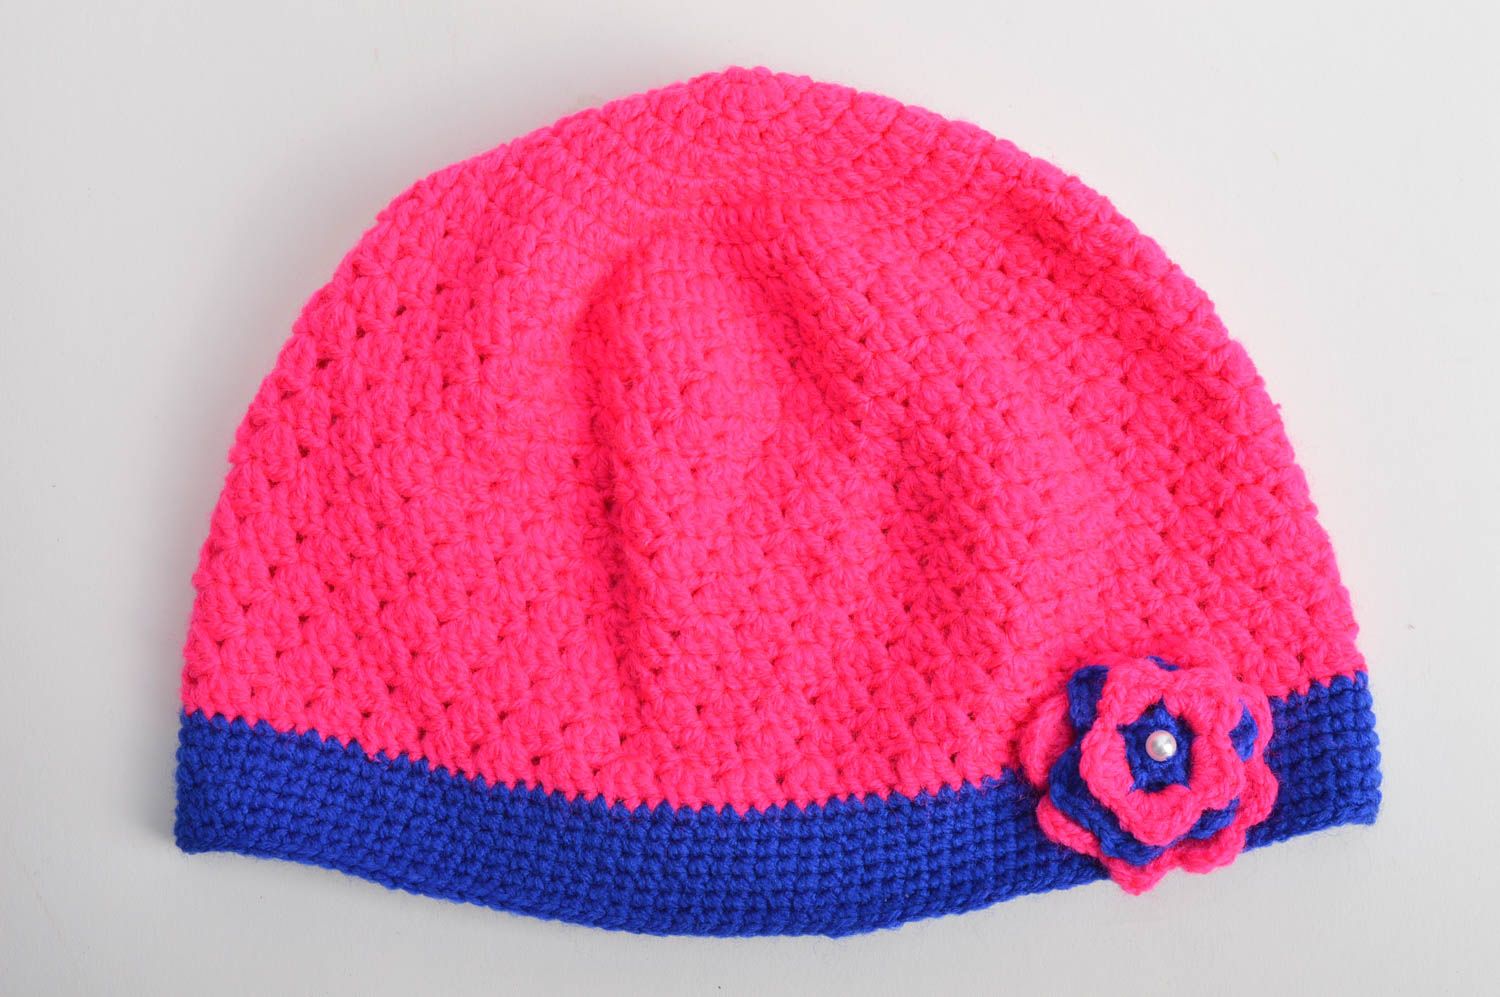 Handmade beautiful cute crocheted pink and blue cap with flower for kids  photo 2